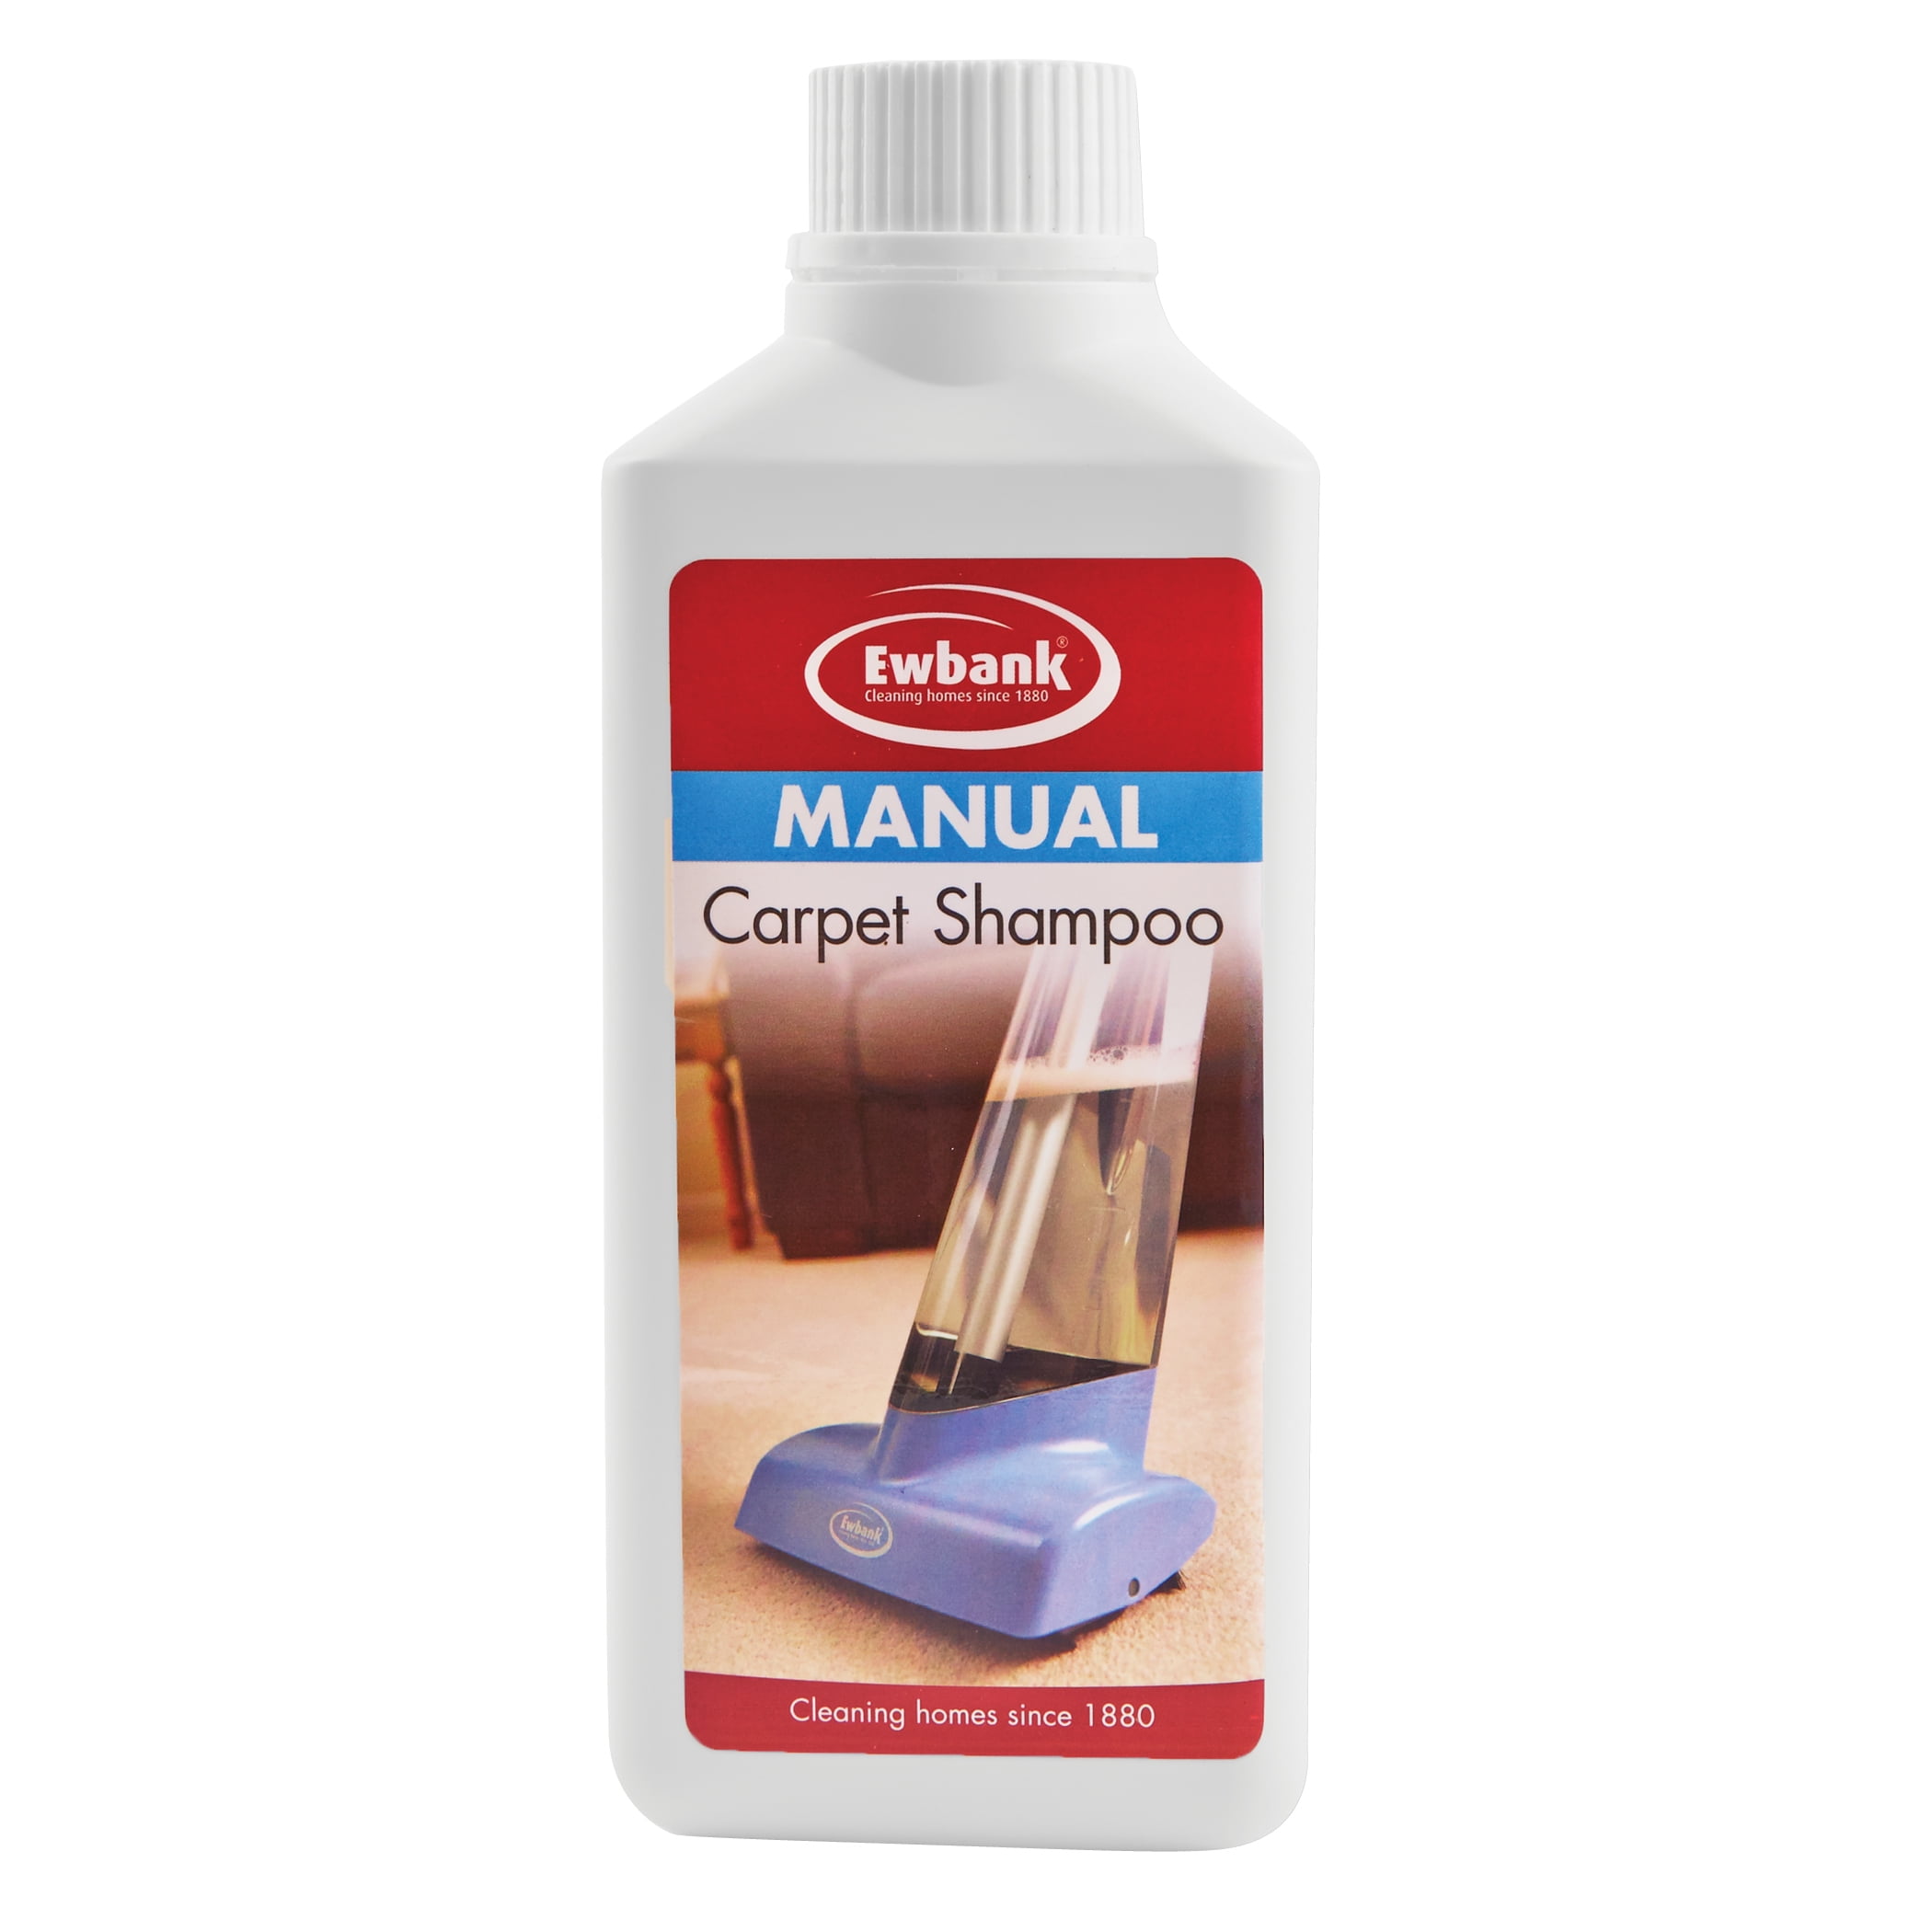 Ewbank 280 Cascade Manual Carpet Shampooer Lightweight Upright Carpet and Upholstery Cleaner with Trigger Shampoo Release 